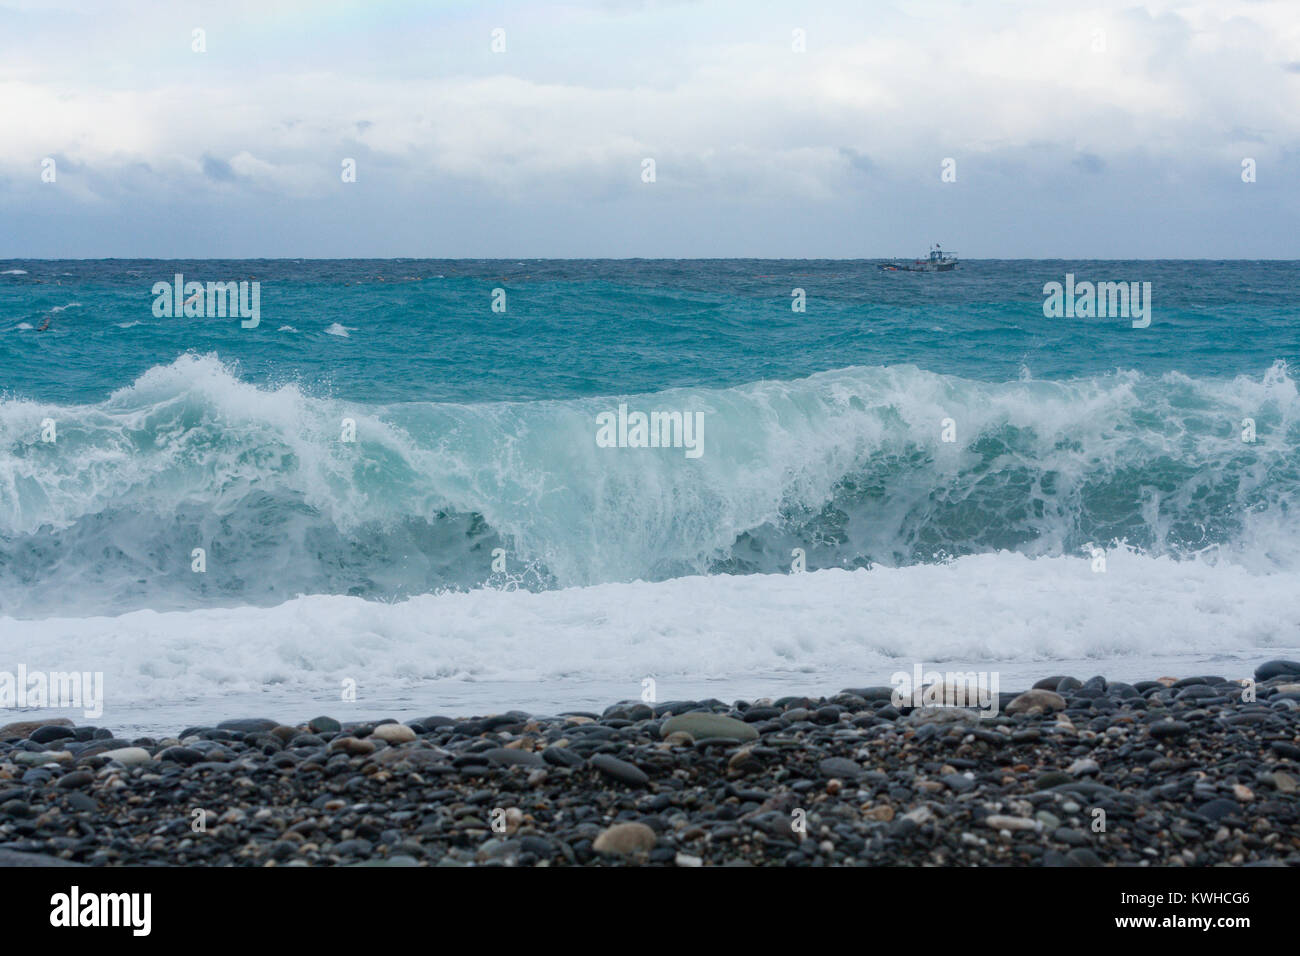 Fishing boat sailing in the sea behind plunging or dumping wave, view from pebble beach, Chisingtan Scenic Area, Xincheng Township, Hualien, Taiwan Stock Photo